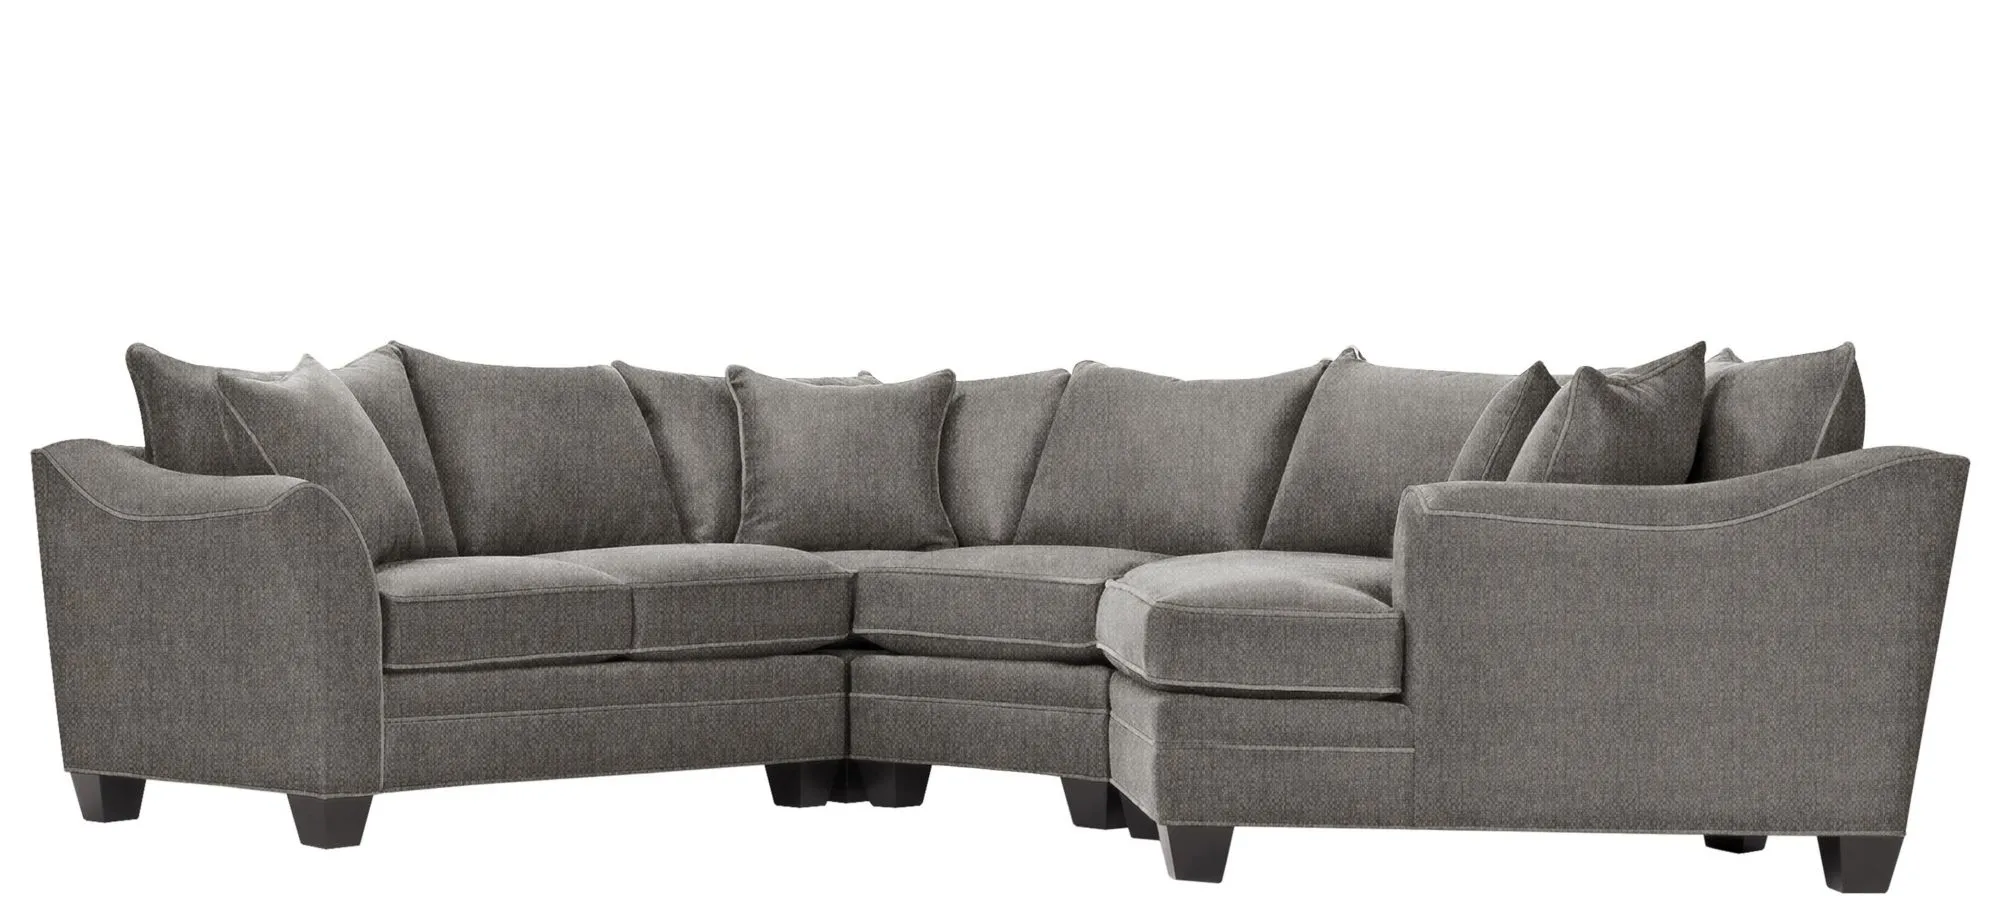 Foresthill 4-pc. Right Hand Cuddler Sectional Sofa in Sugar Shack Stone by H.M. Richards